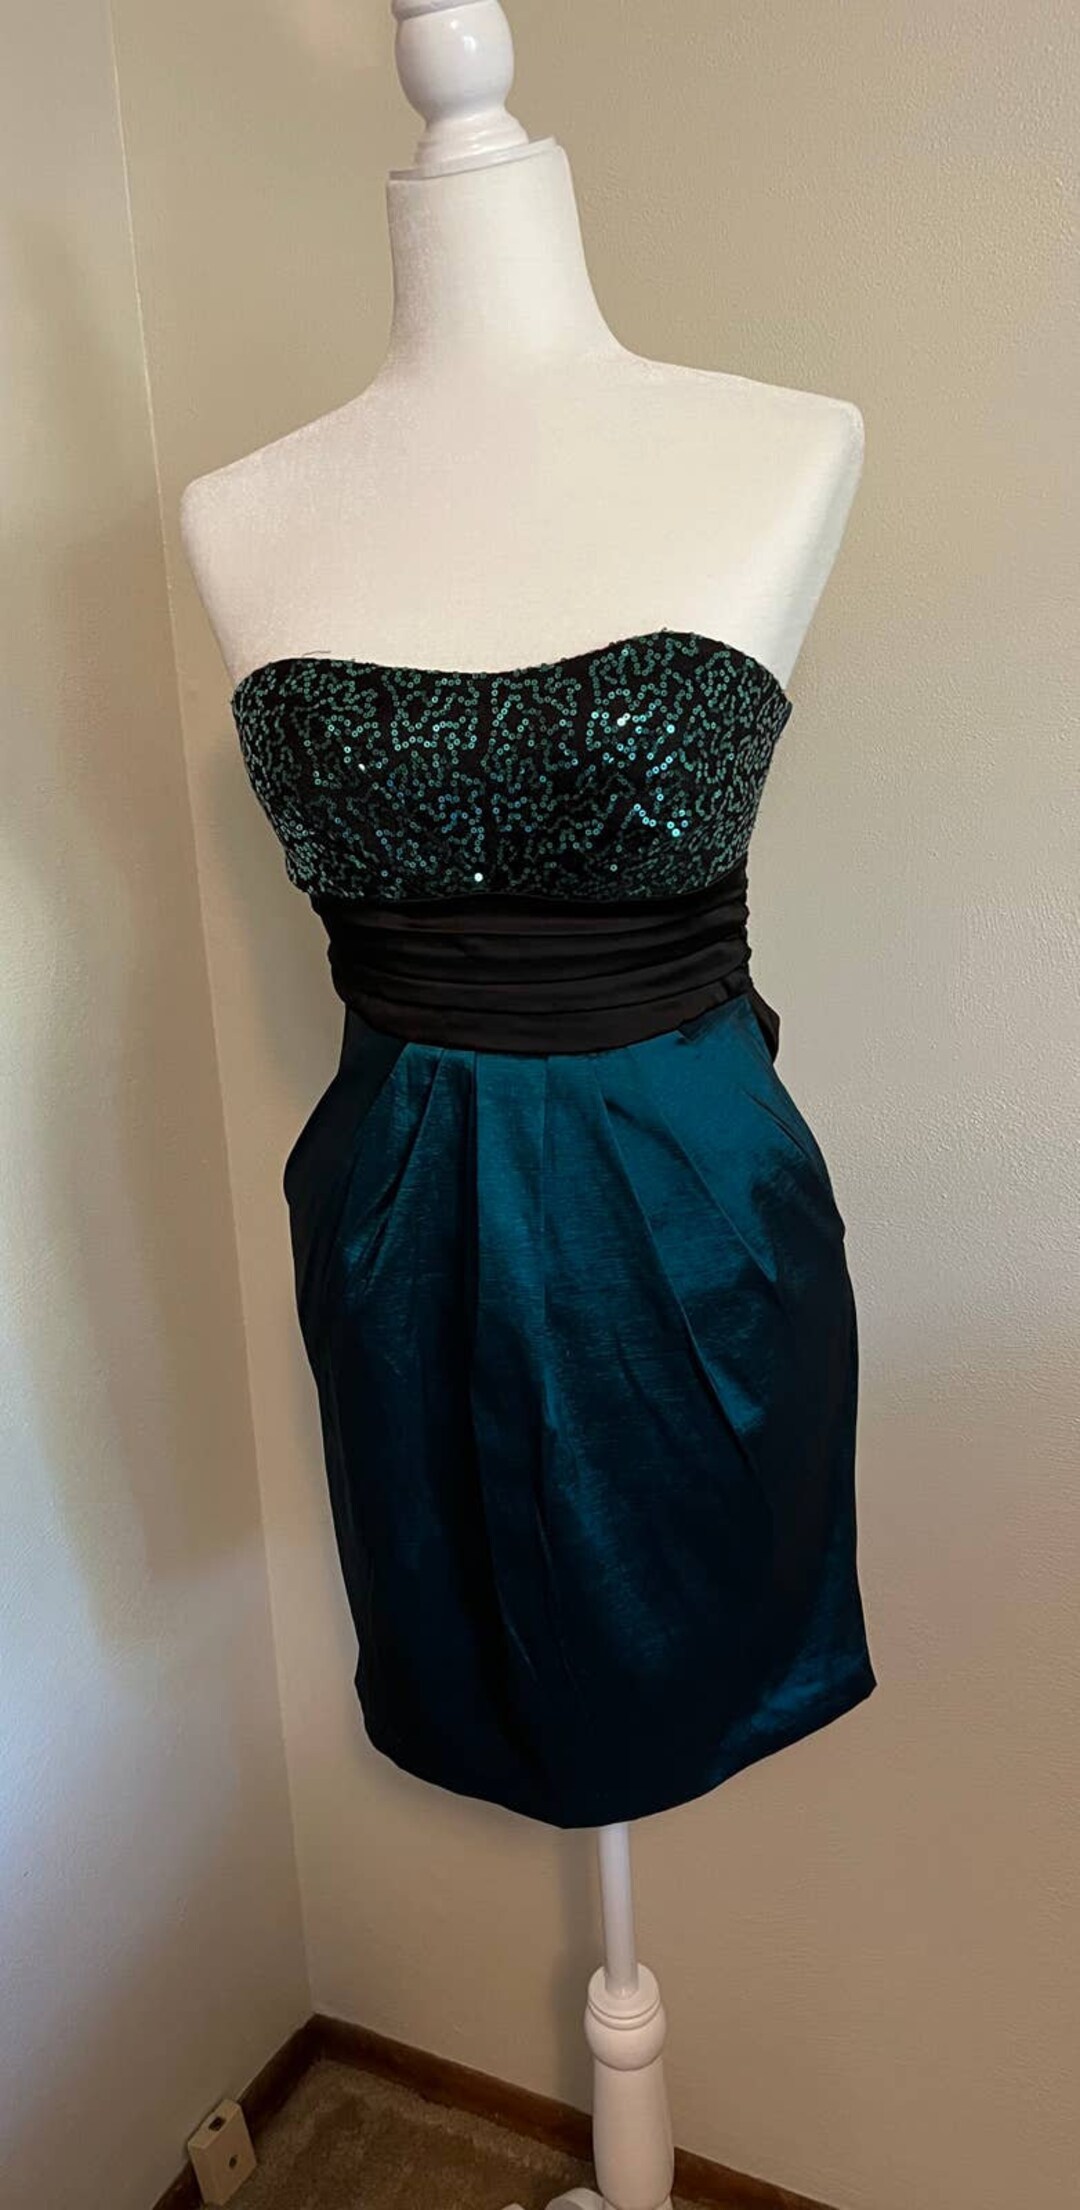 Ruby Rox Teal Evening Gown Sequin Chest Stretch Black Sash - Etsy